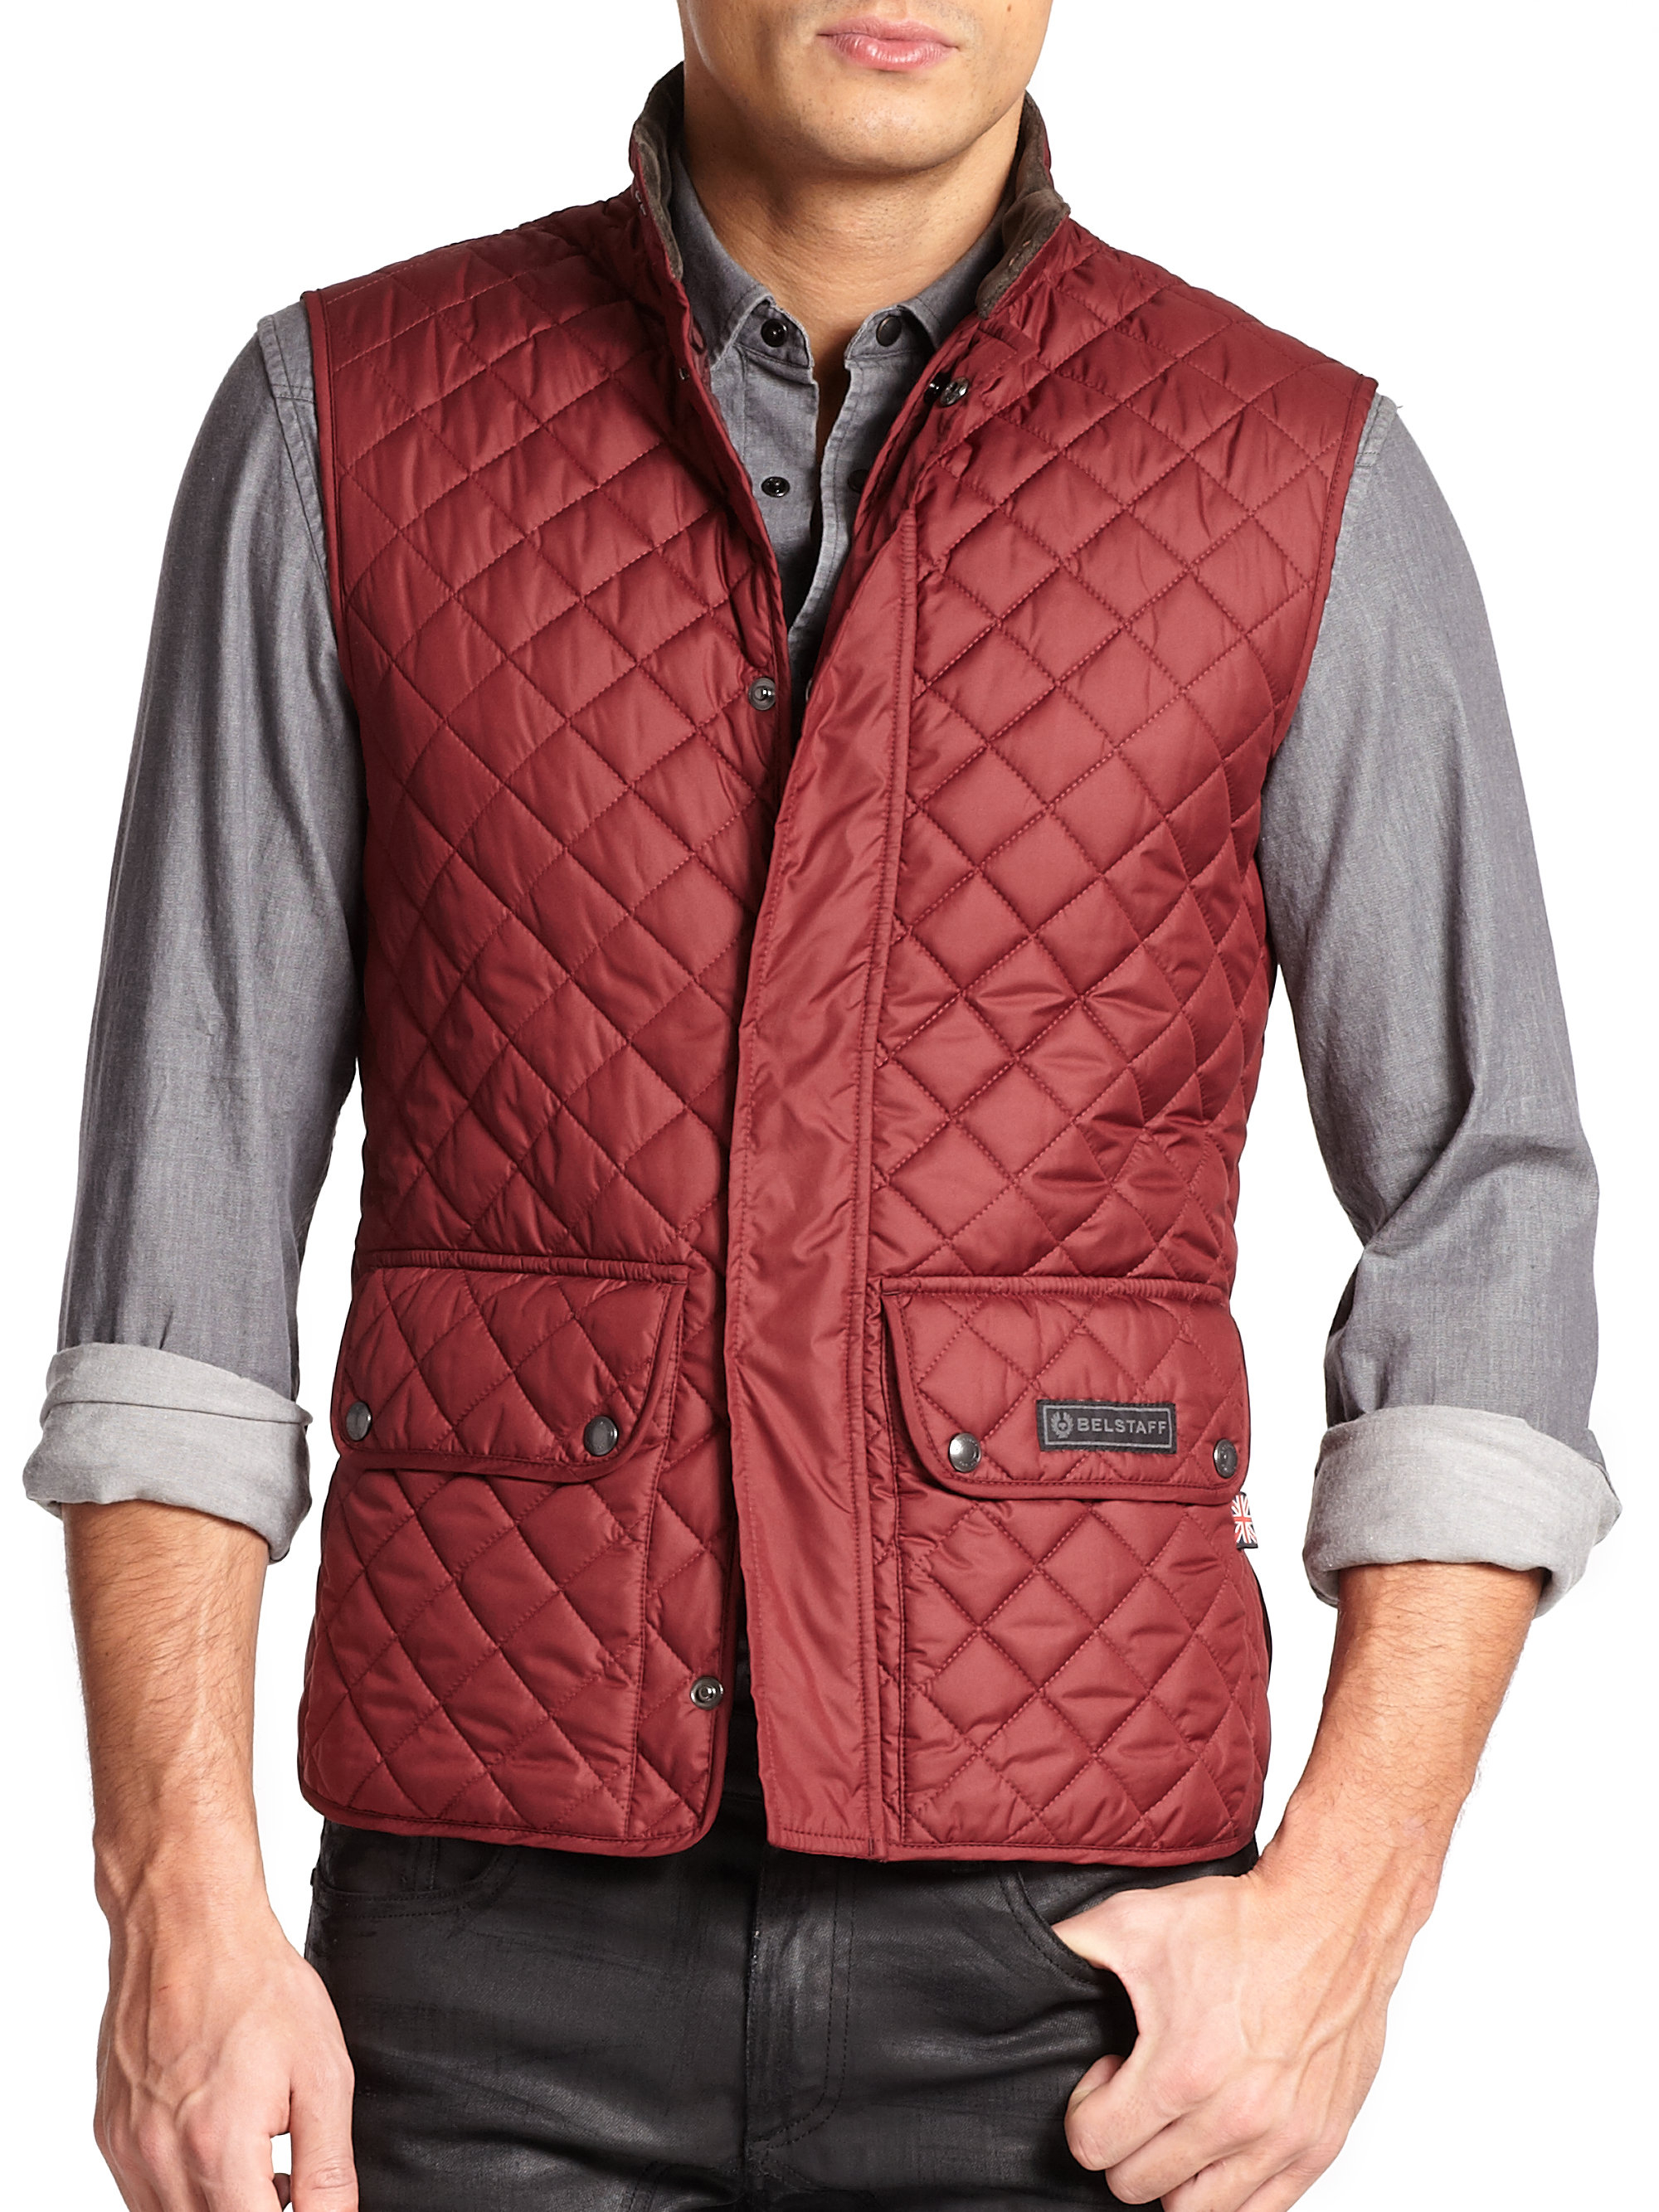 Lyst - Belstaff Technical Quilted Vest in Red